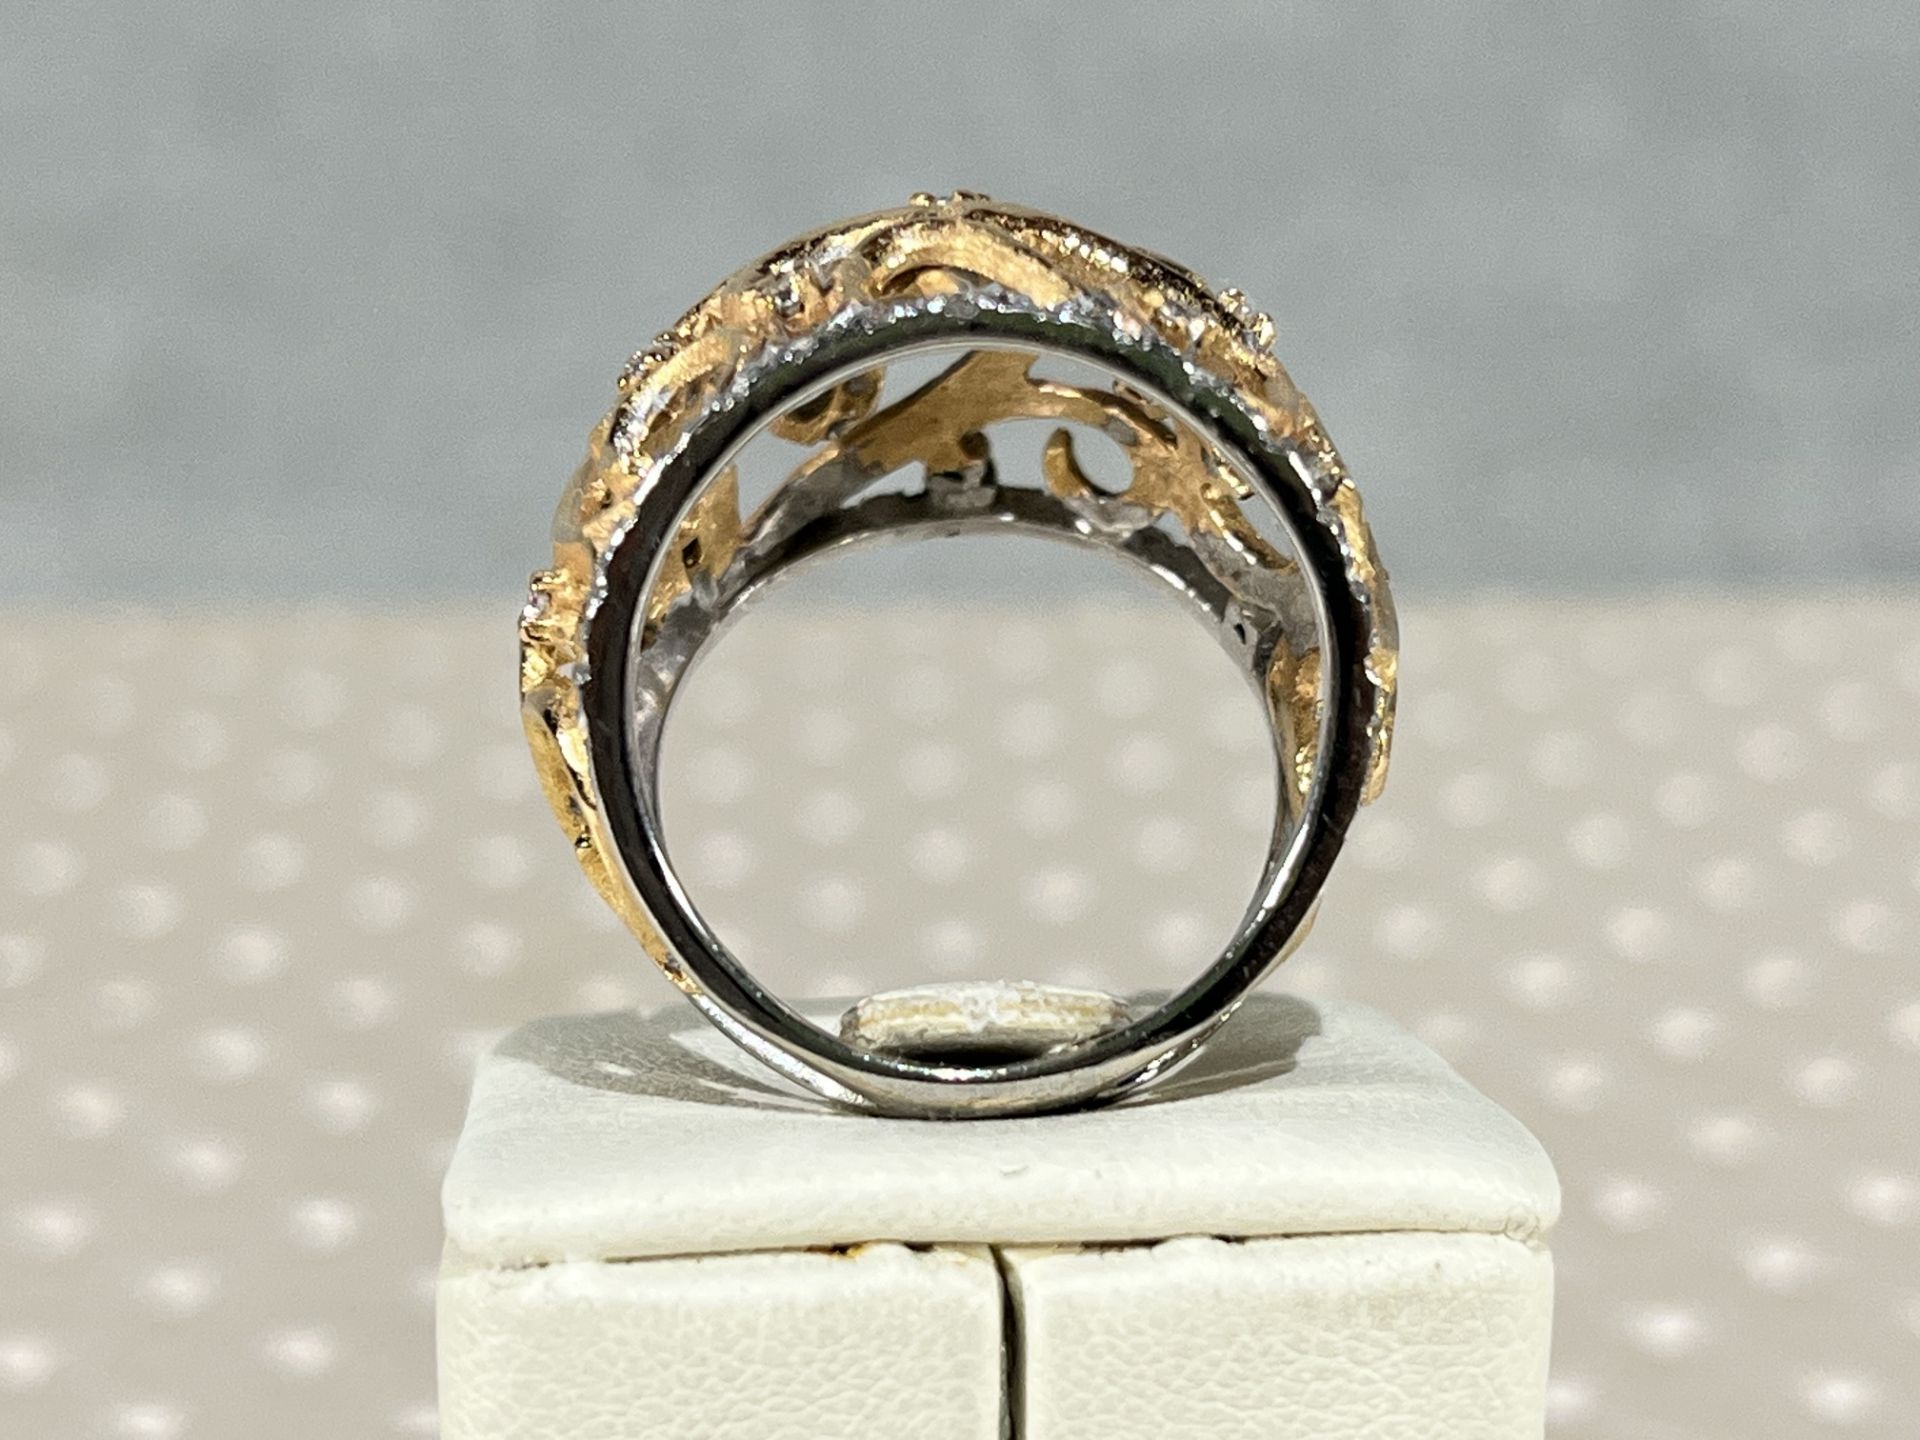 18k white and rose GOLD ring - Brilliant cut diamonds 0.60 ct - Weight: 11.7 gr - Image 4 of 4